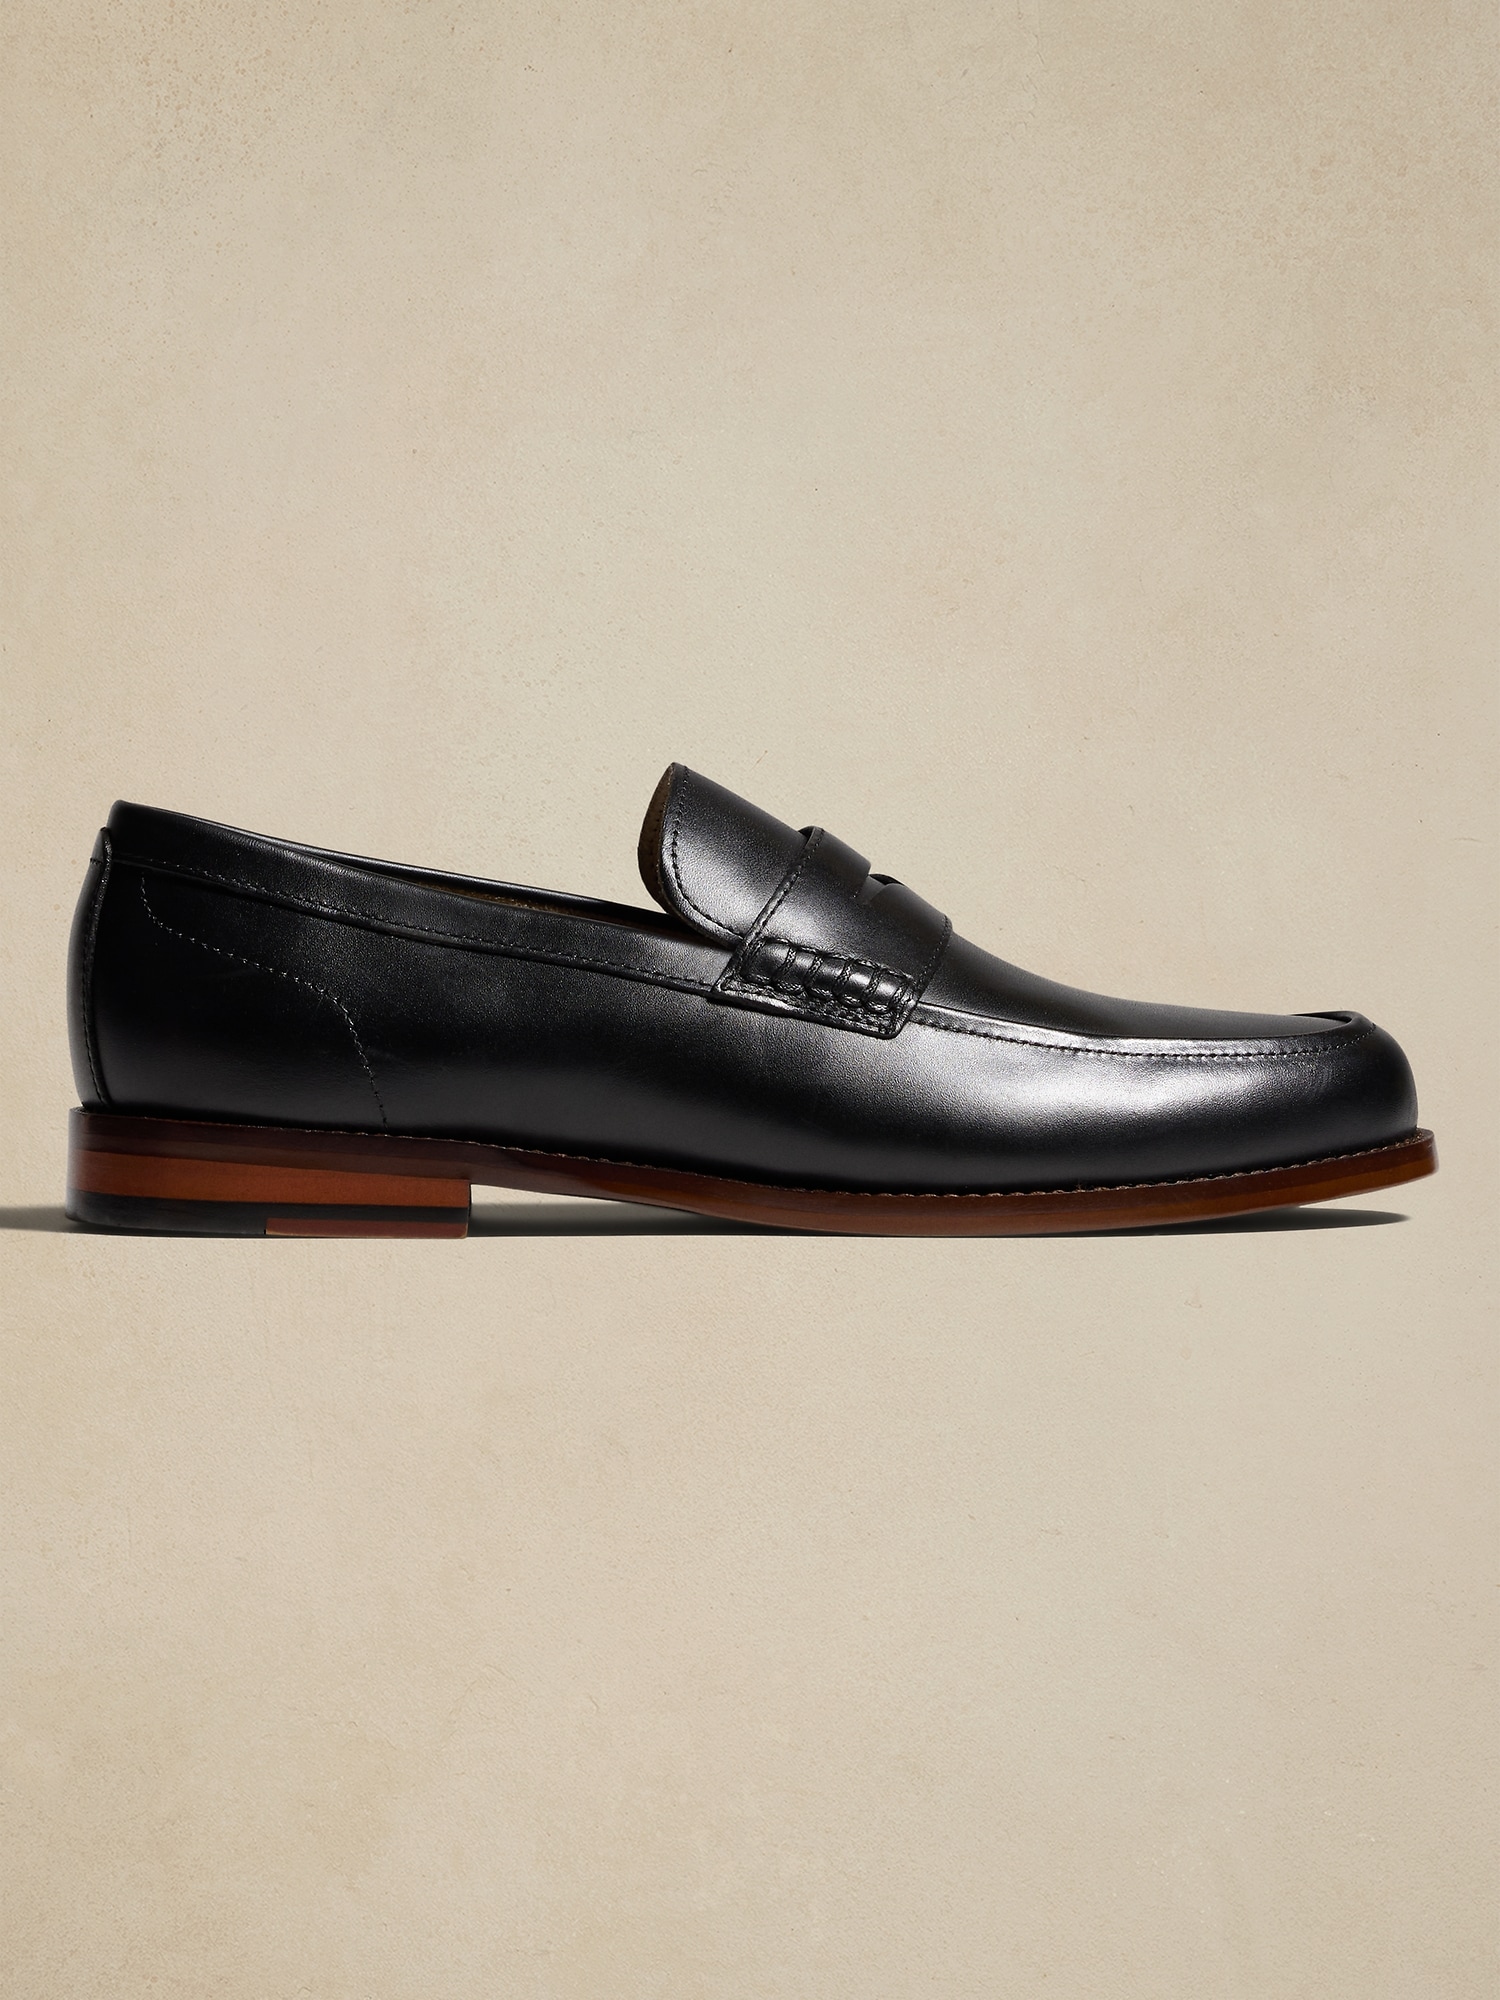 Leather Penny Loafer | Banana Republic Factory